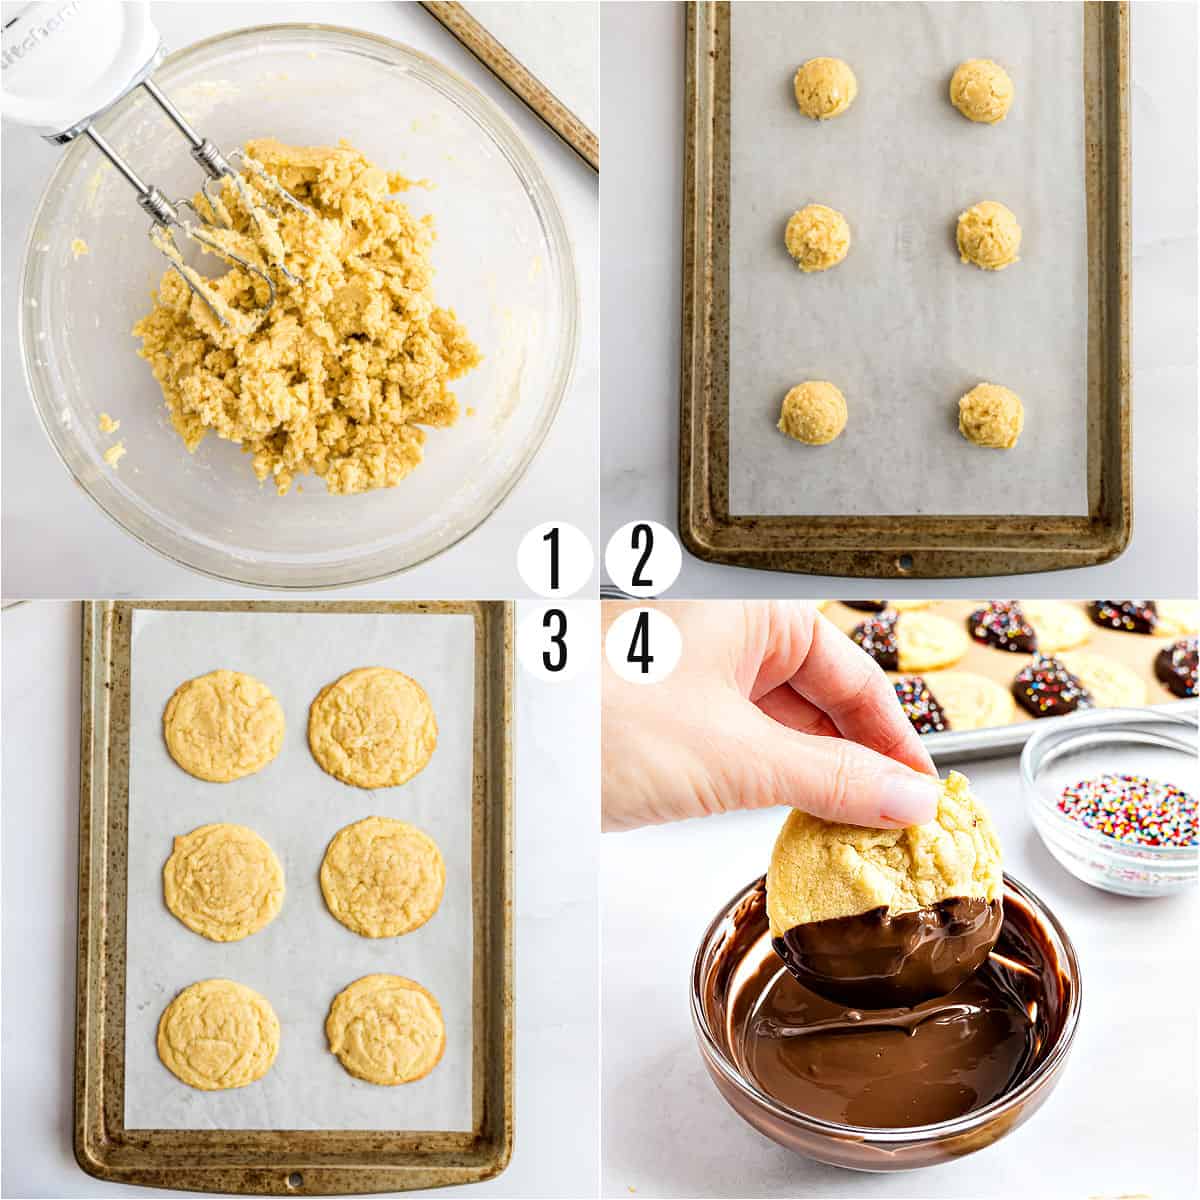 Step by step photos showing how to make butter cookies.